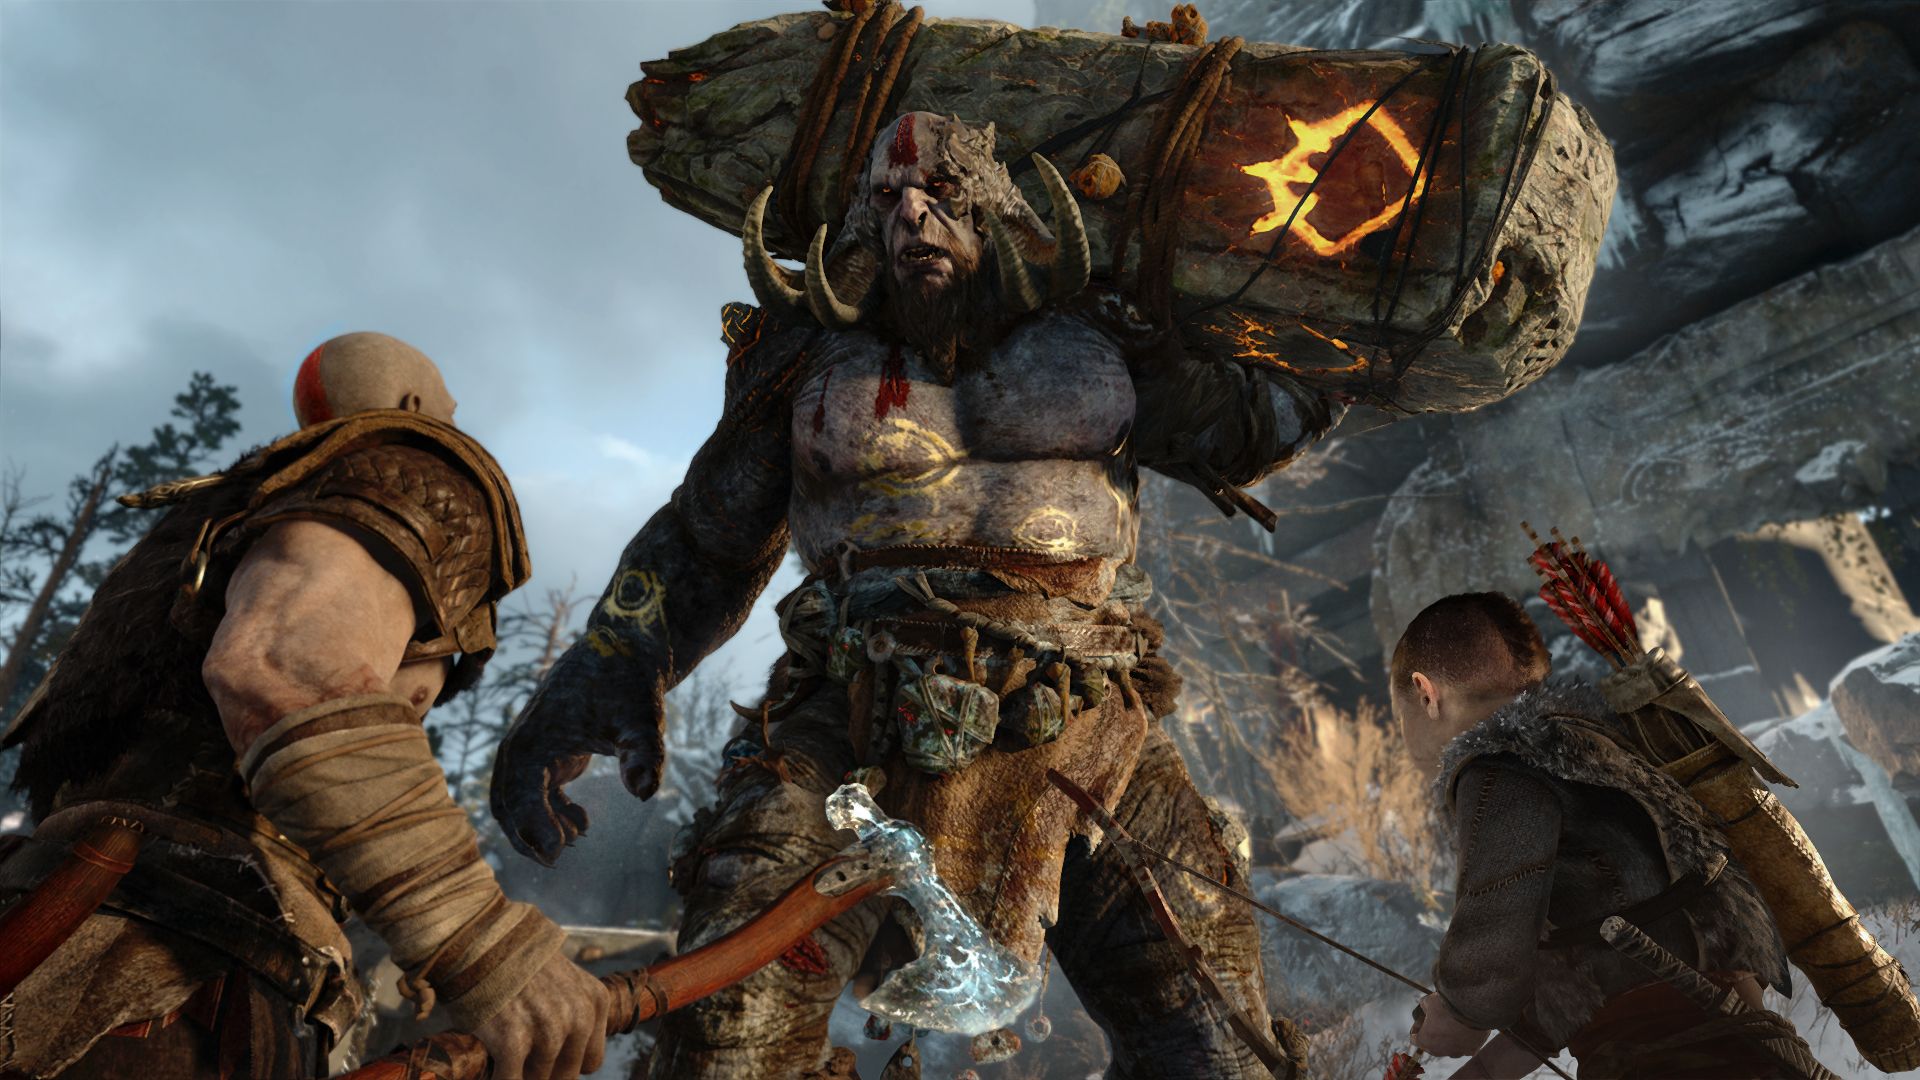 God of War Gets New Trailer Featuring the Fire Troll